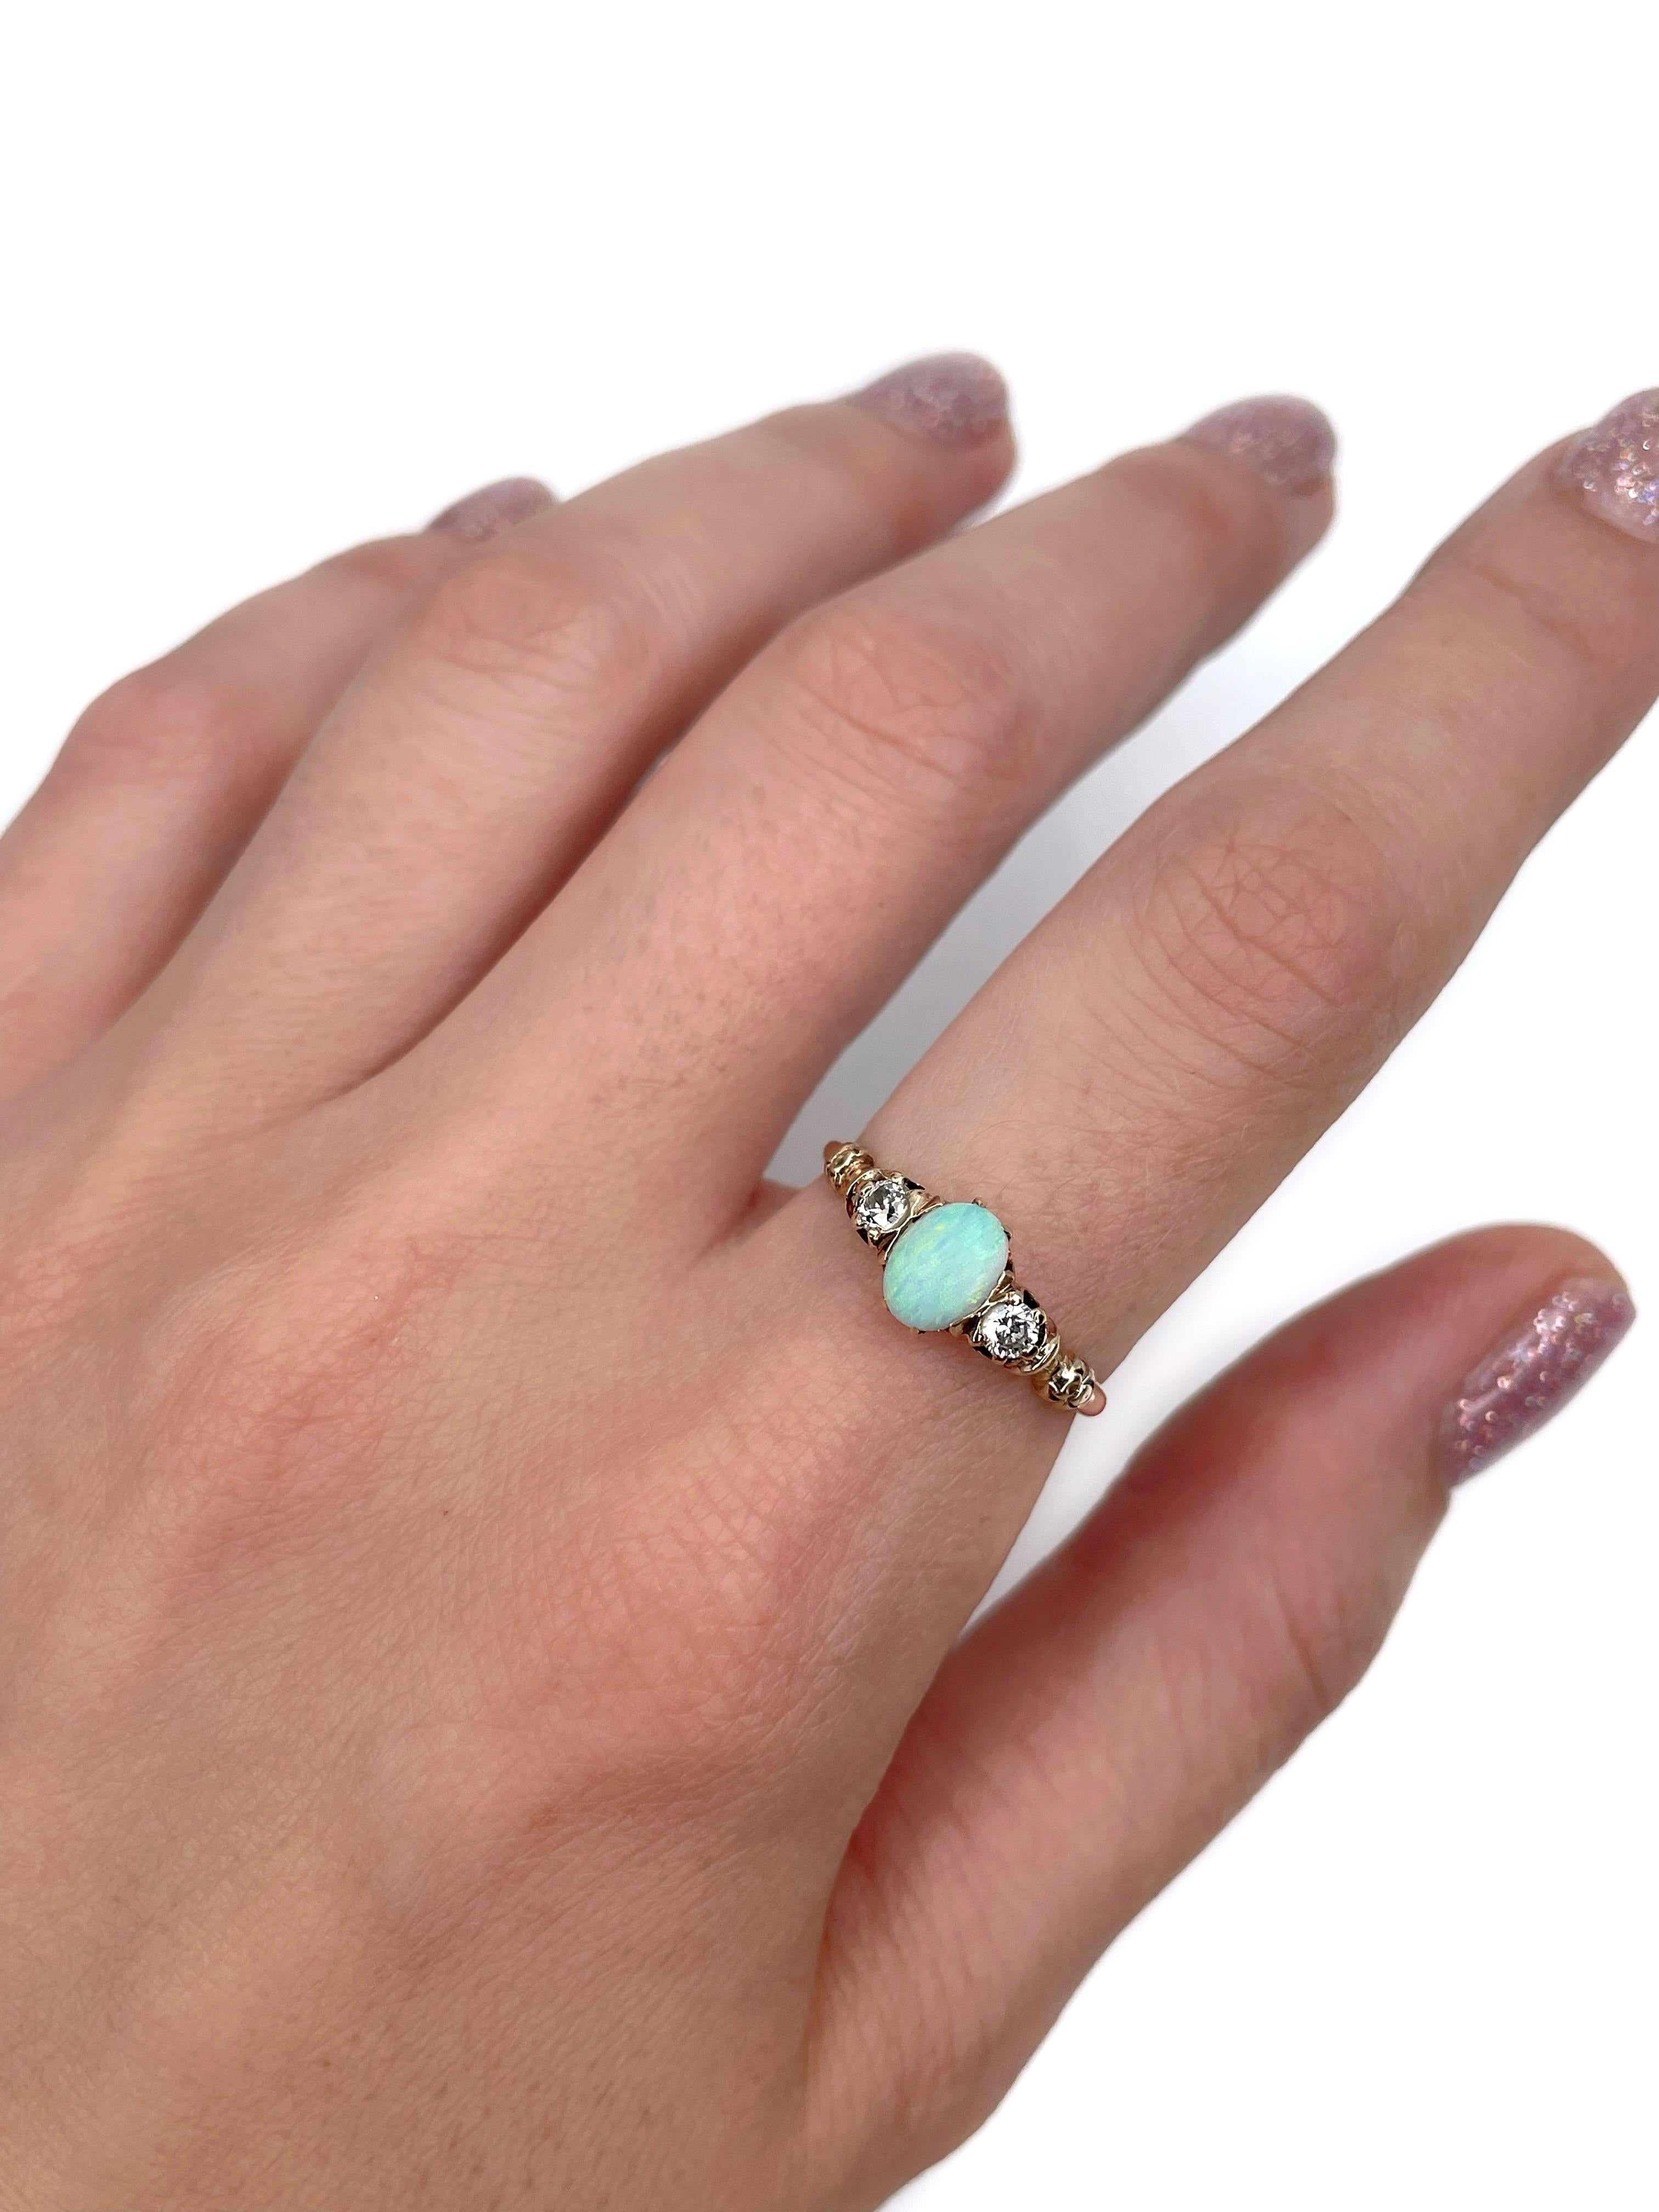 This is an Edwardian three stone band ring crafted in 14K yellow gold. The piece features 1 oval shaped opal cabochon and 2 round cut diamonds. 

Weight: 2.22g 
Size: 17.25 (US 7)

IMPORTANT: please ask about the possibility to resize before